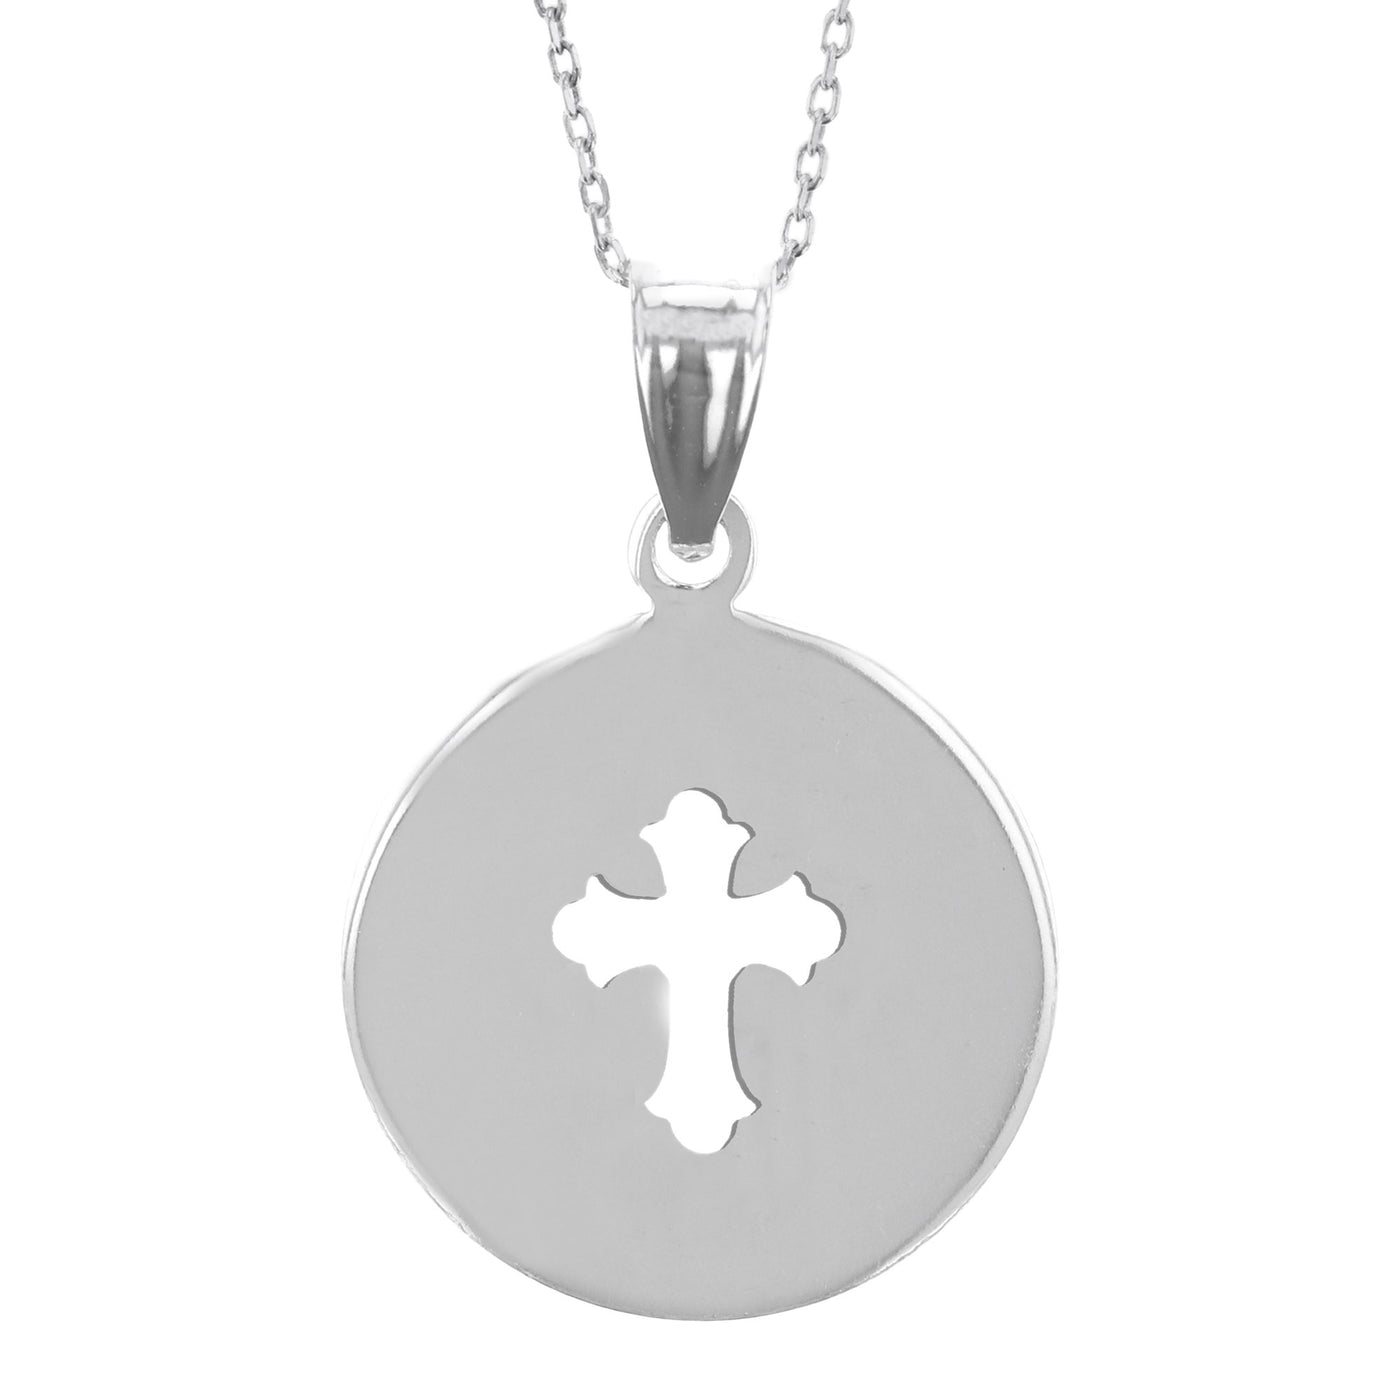 Rebecca Sloane Sterling Silver Round Disc with Cut out Cross Necklace